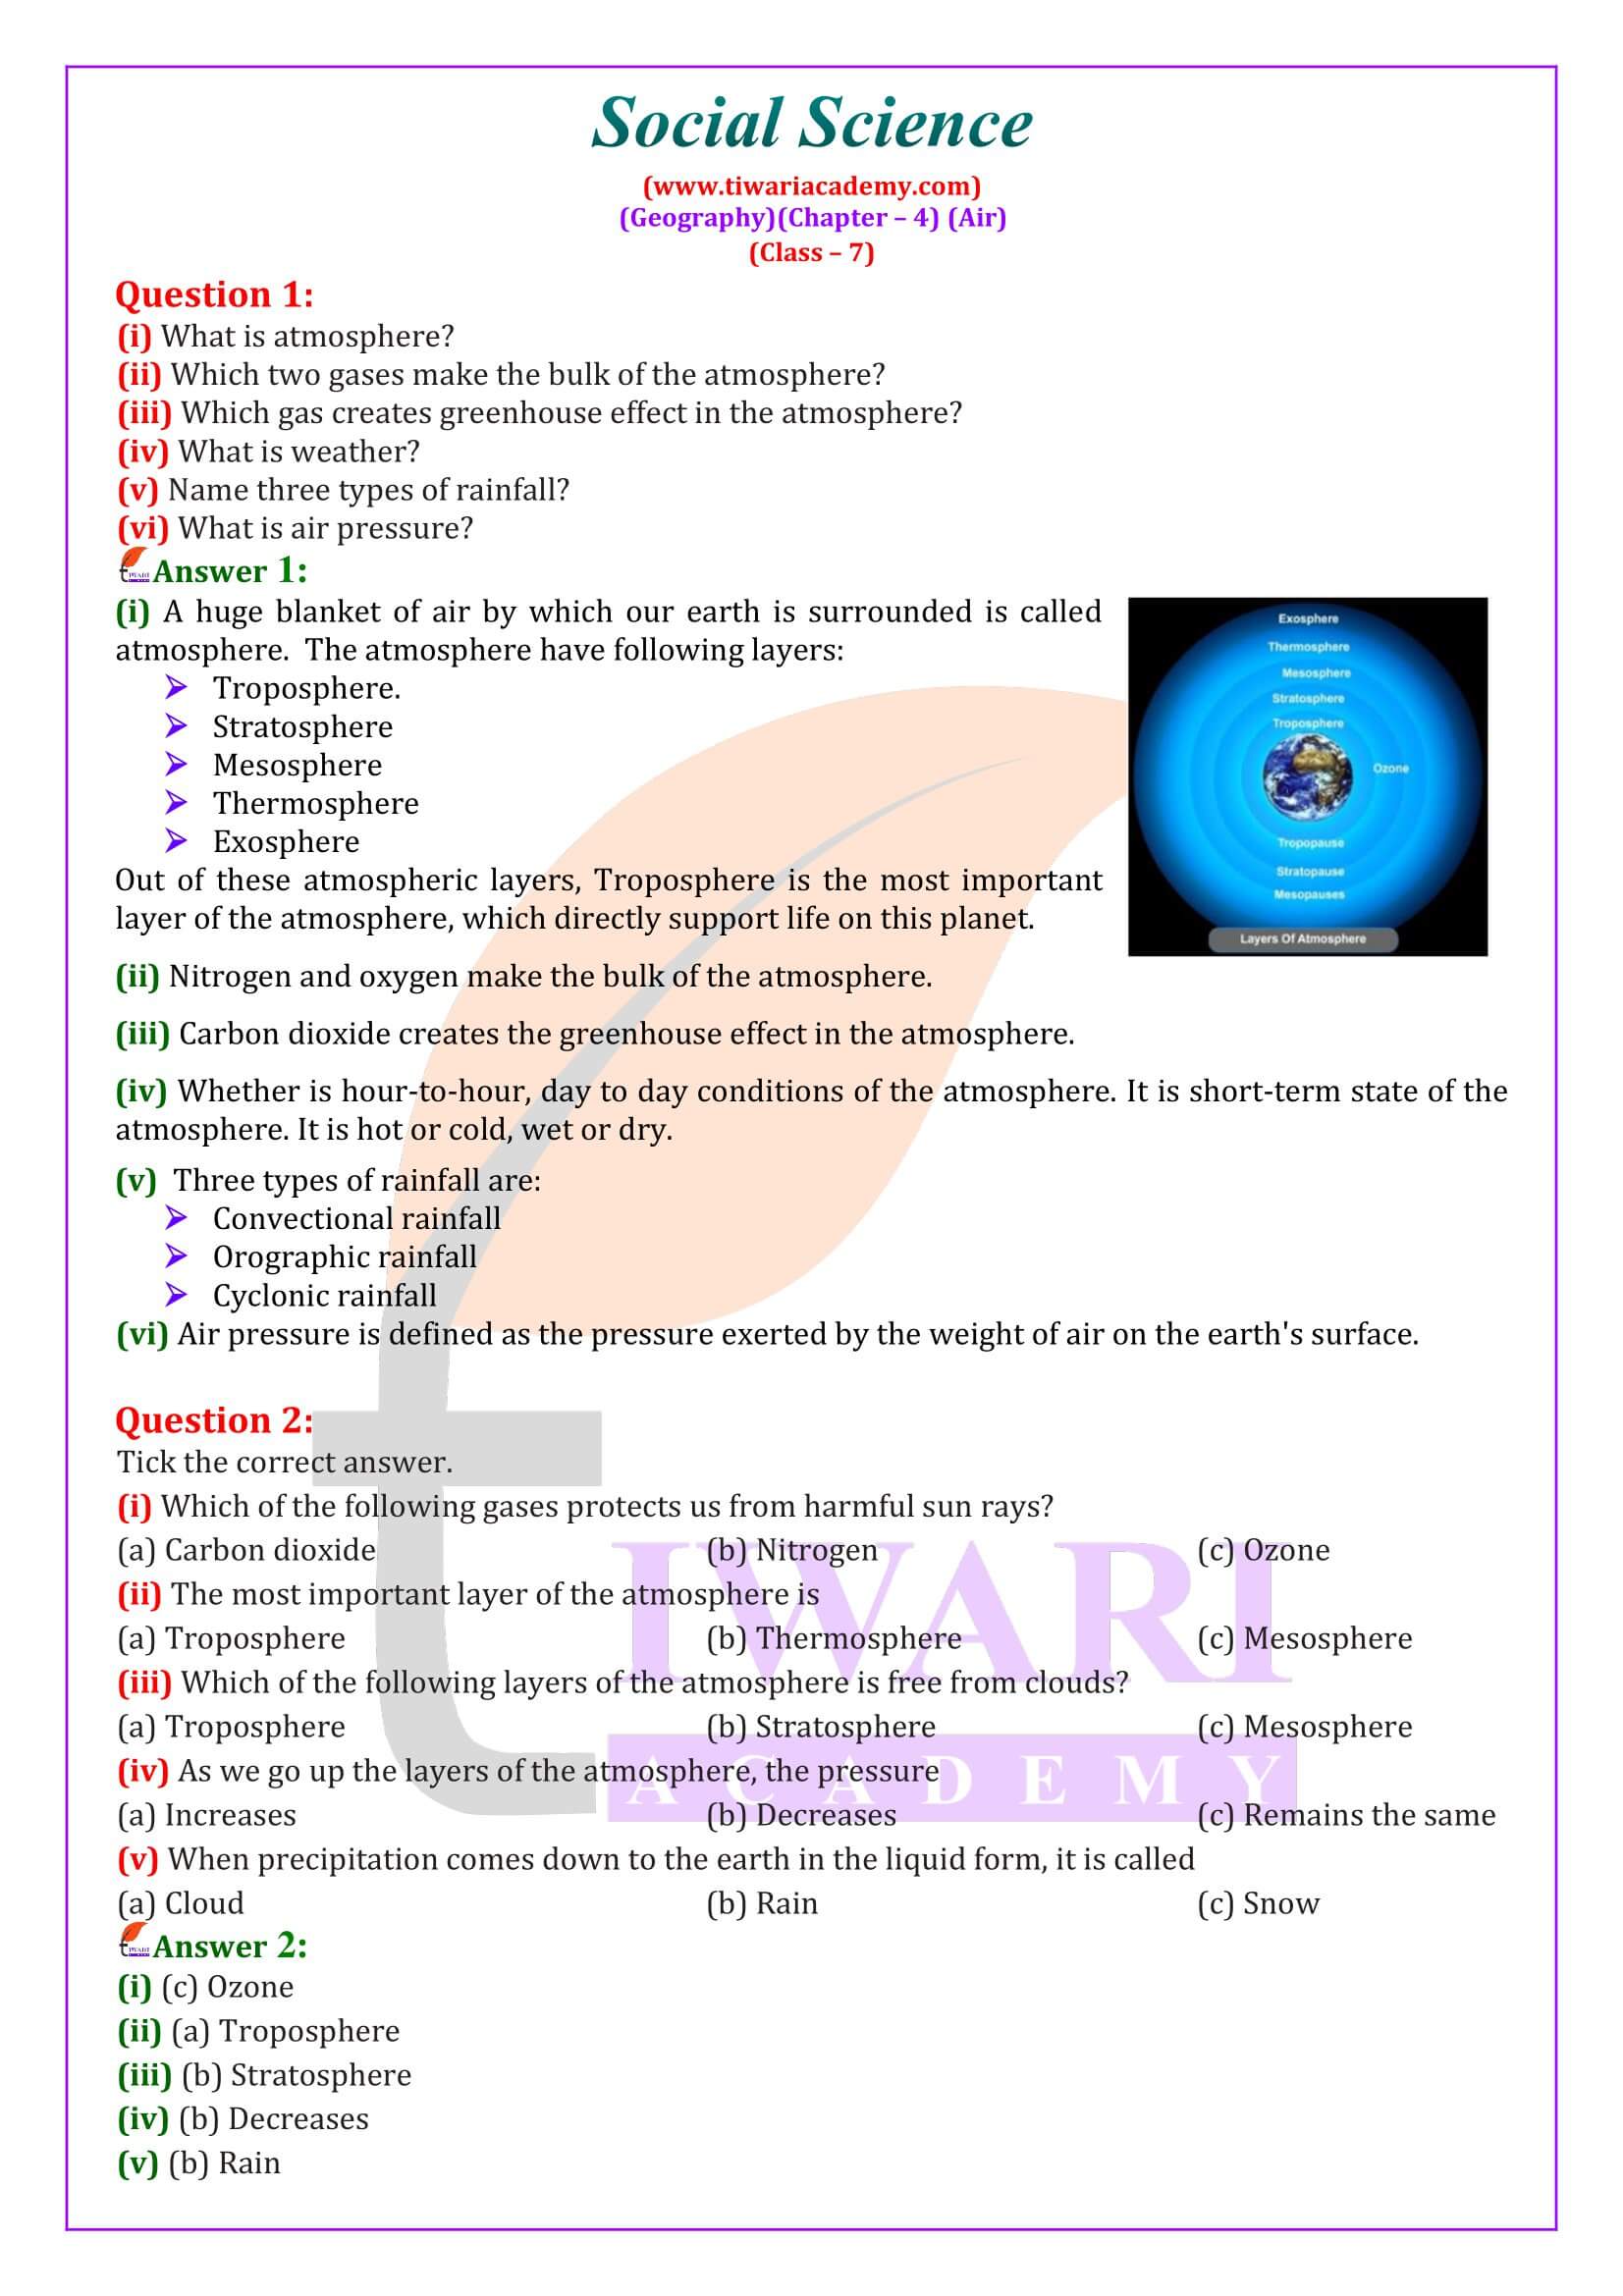 NCERT Solutions for Class 7 Social Science Geography Chapter 4